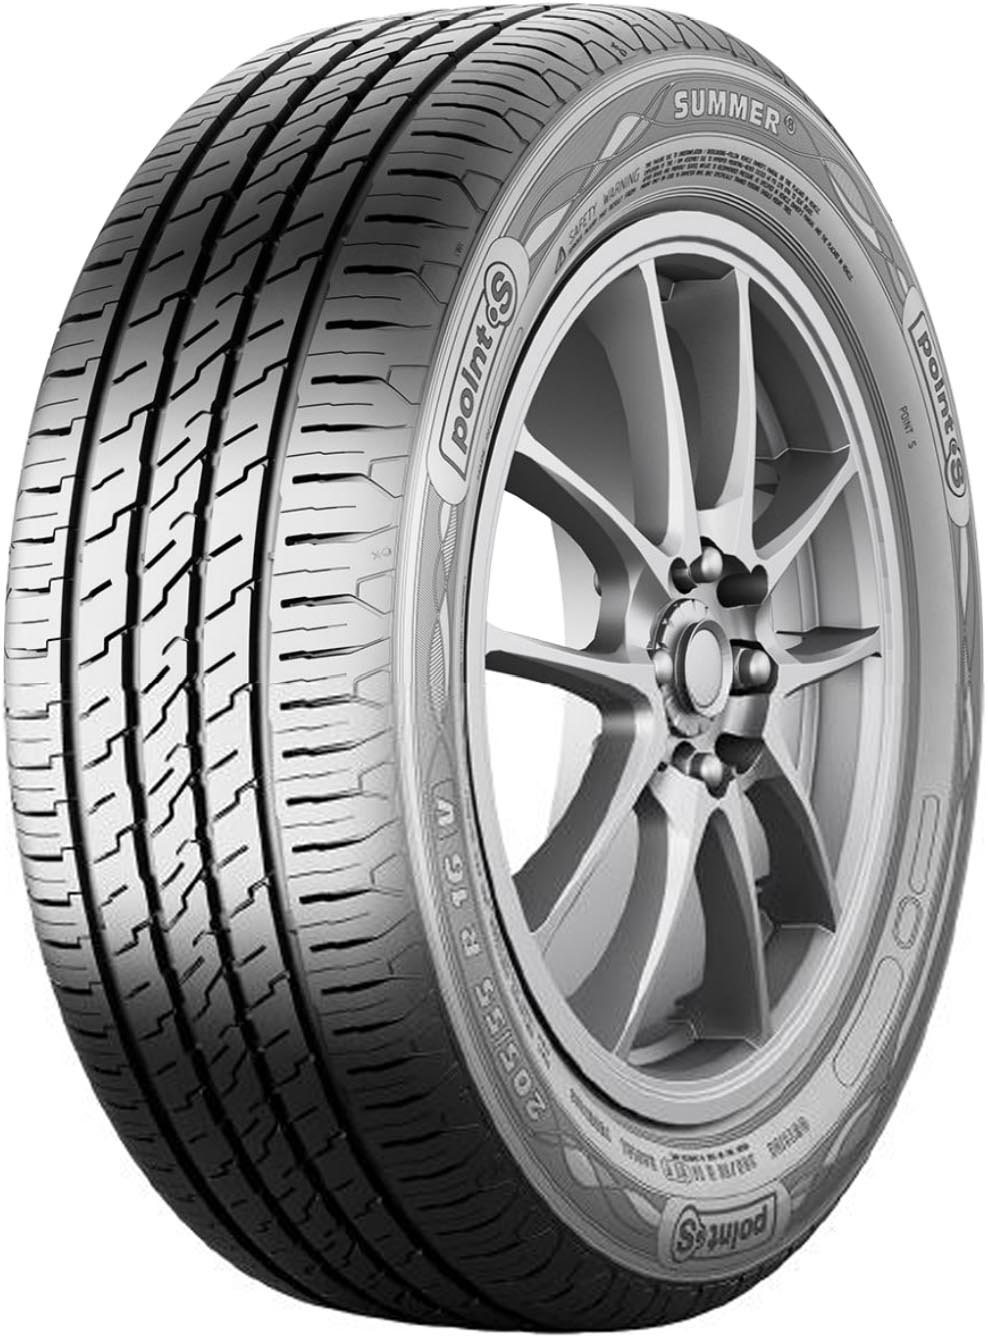 POINTS SUMMER S 235/35R19 91Y